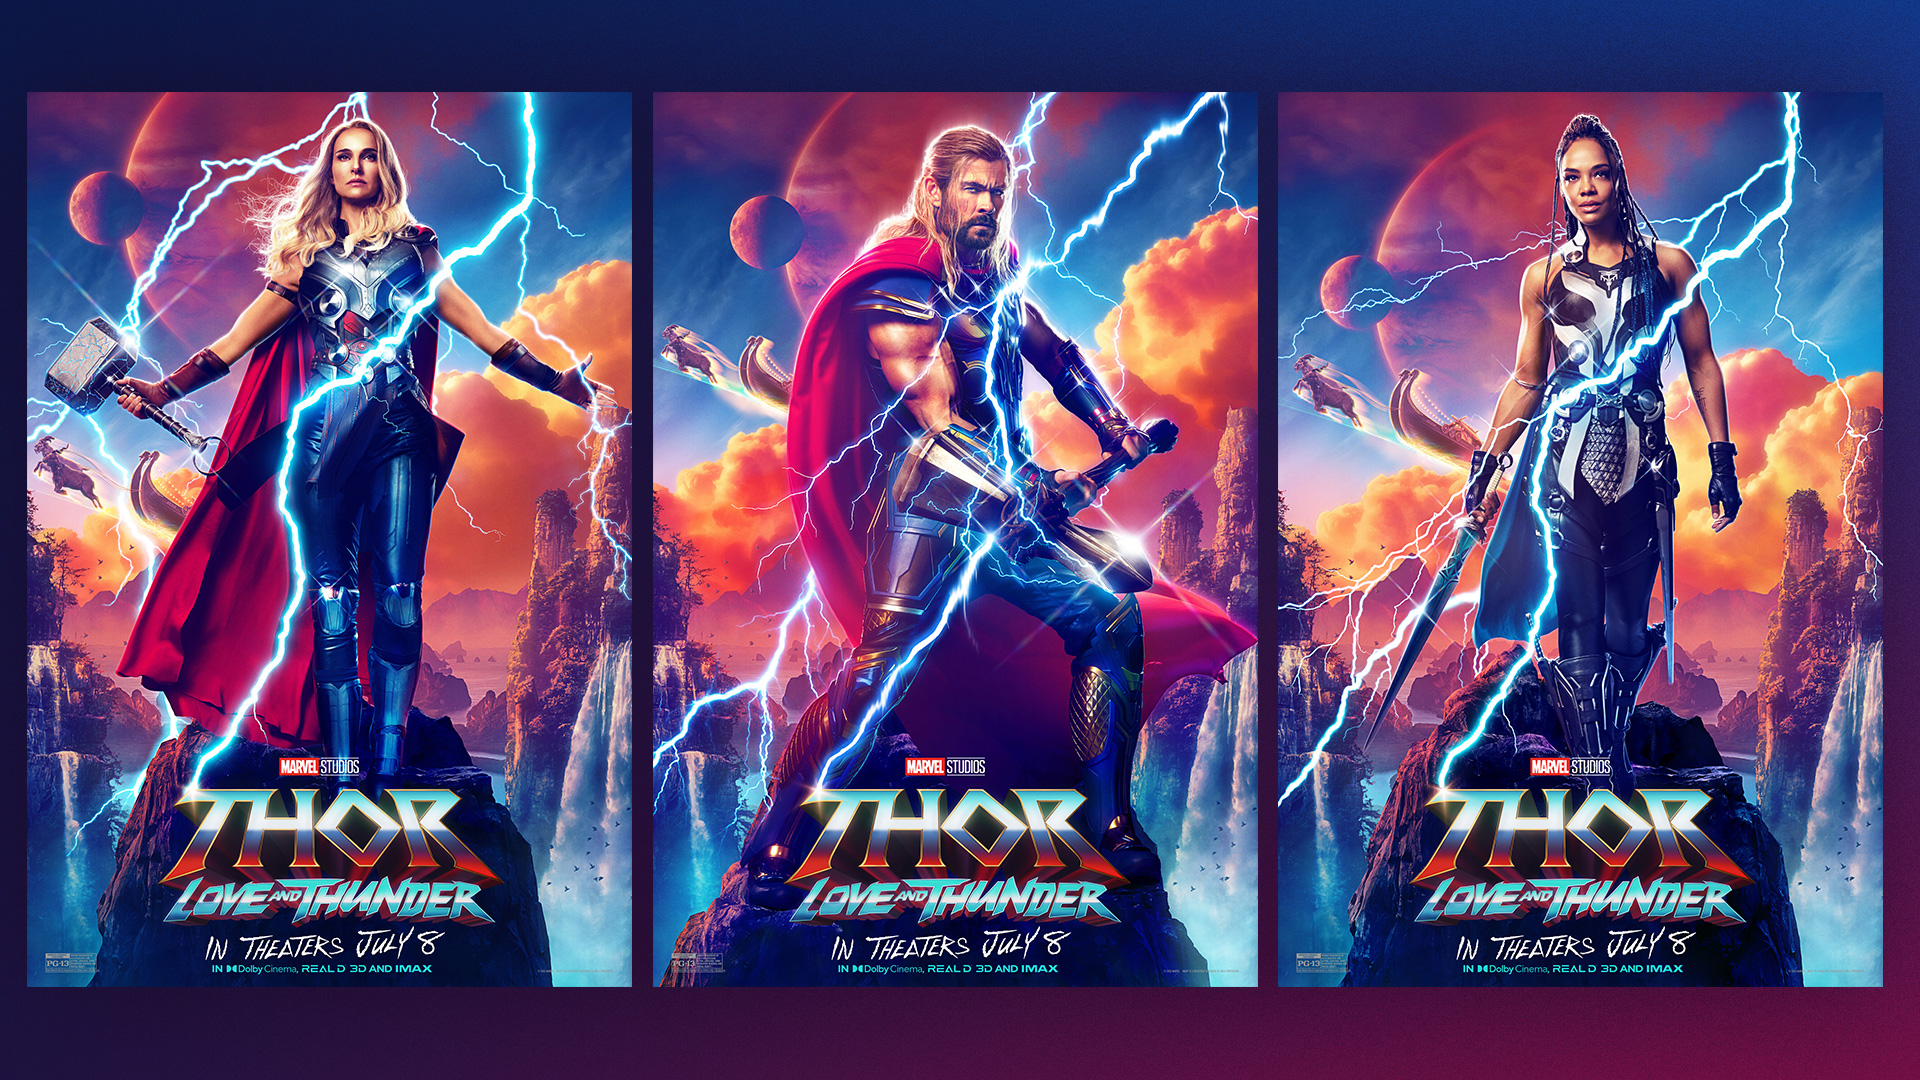 Tickets now on sale for THOR: LOVE AND THUNDER, new character posters TV spot unveiled